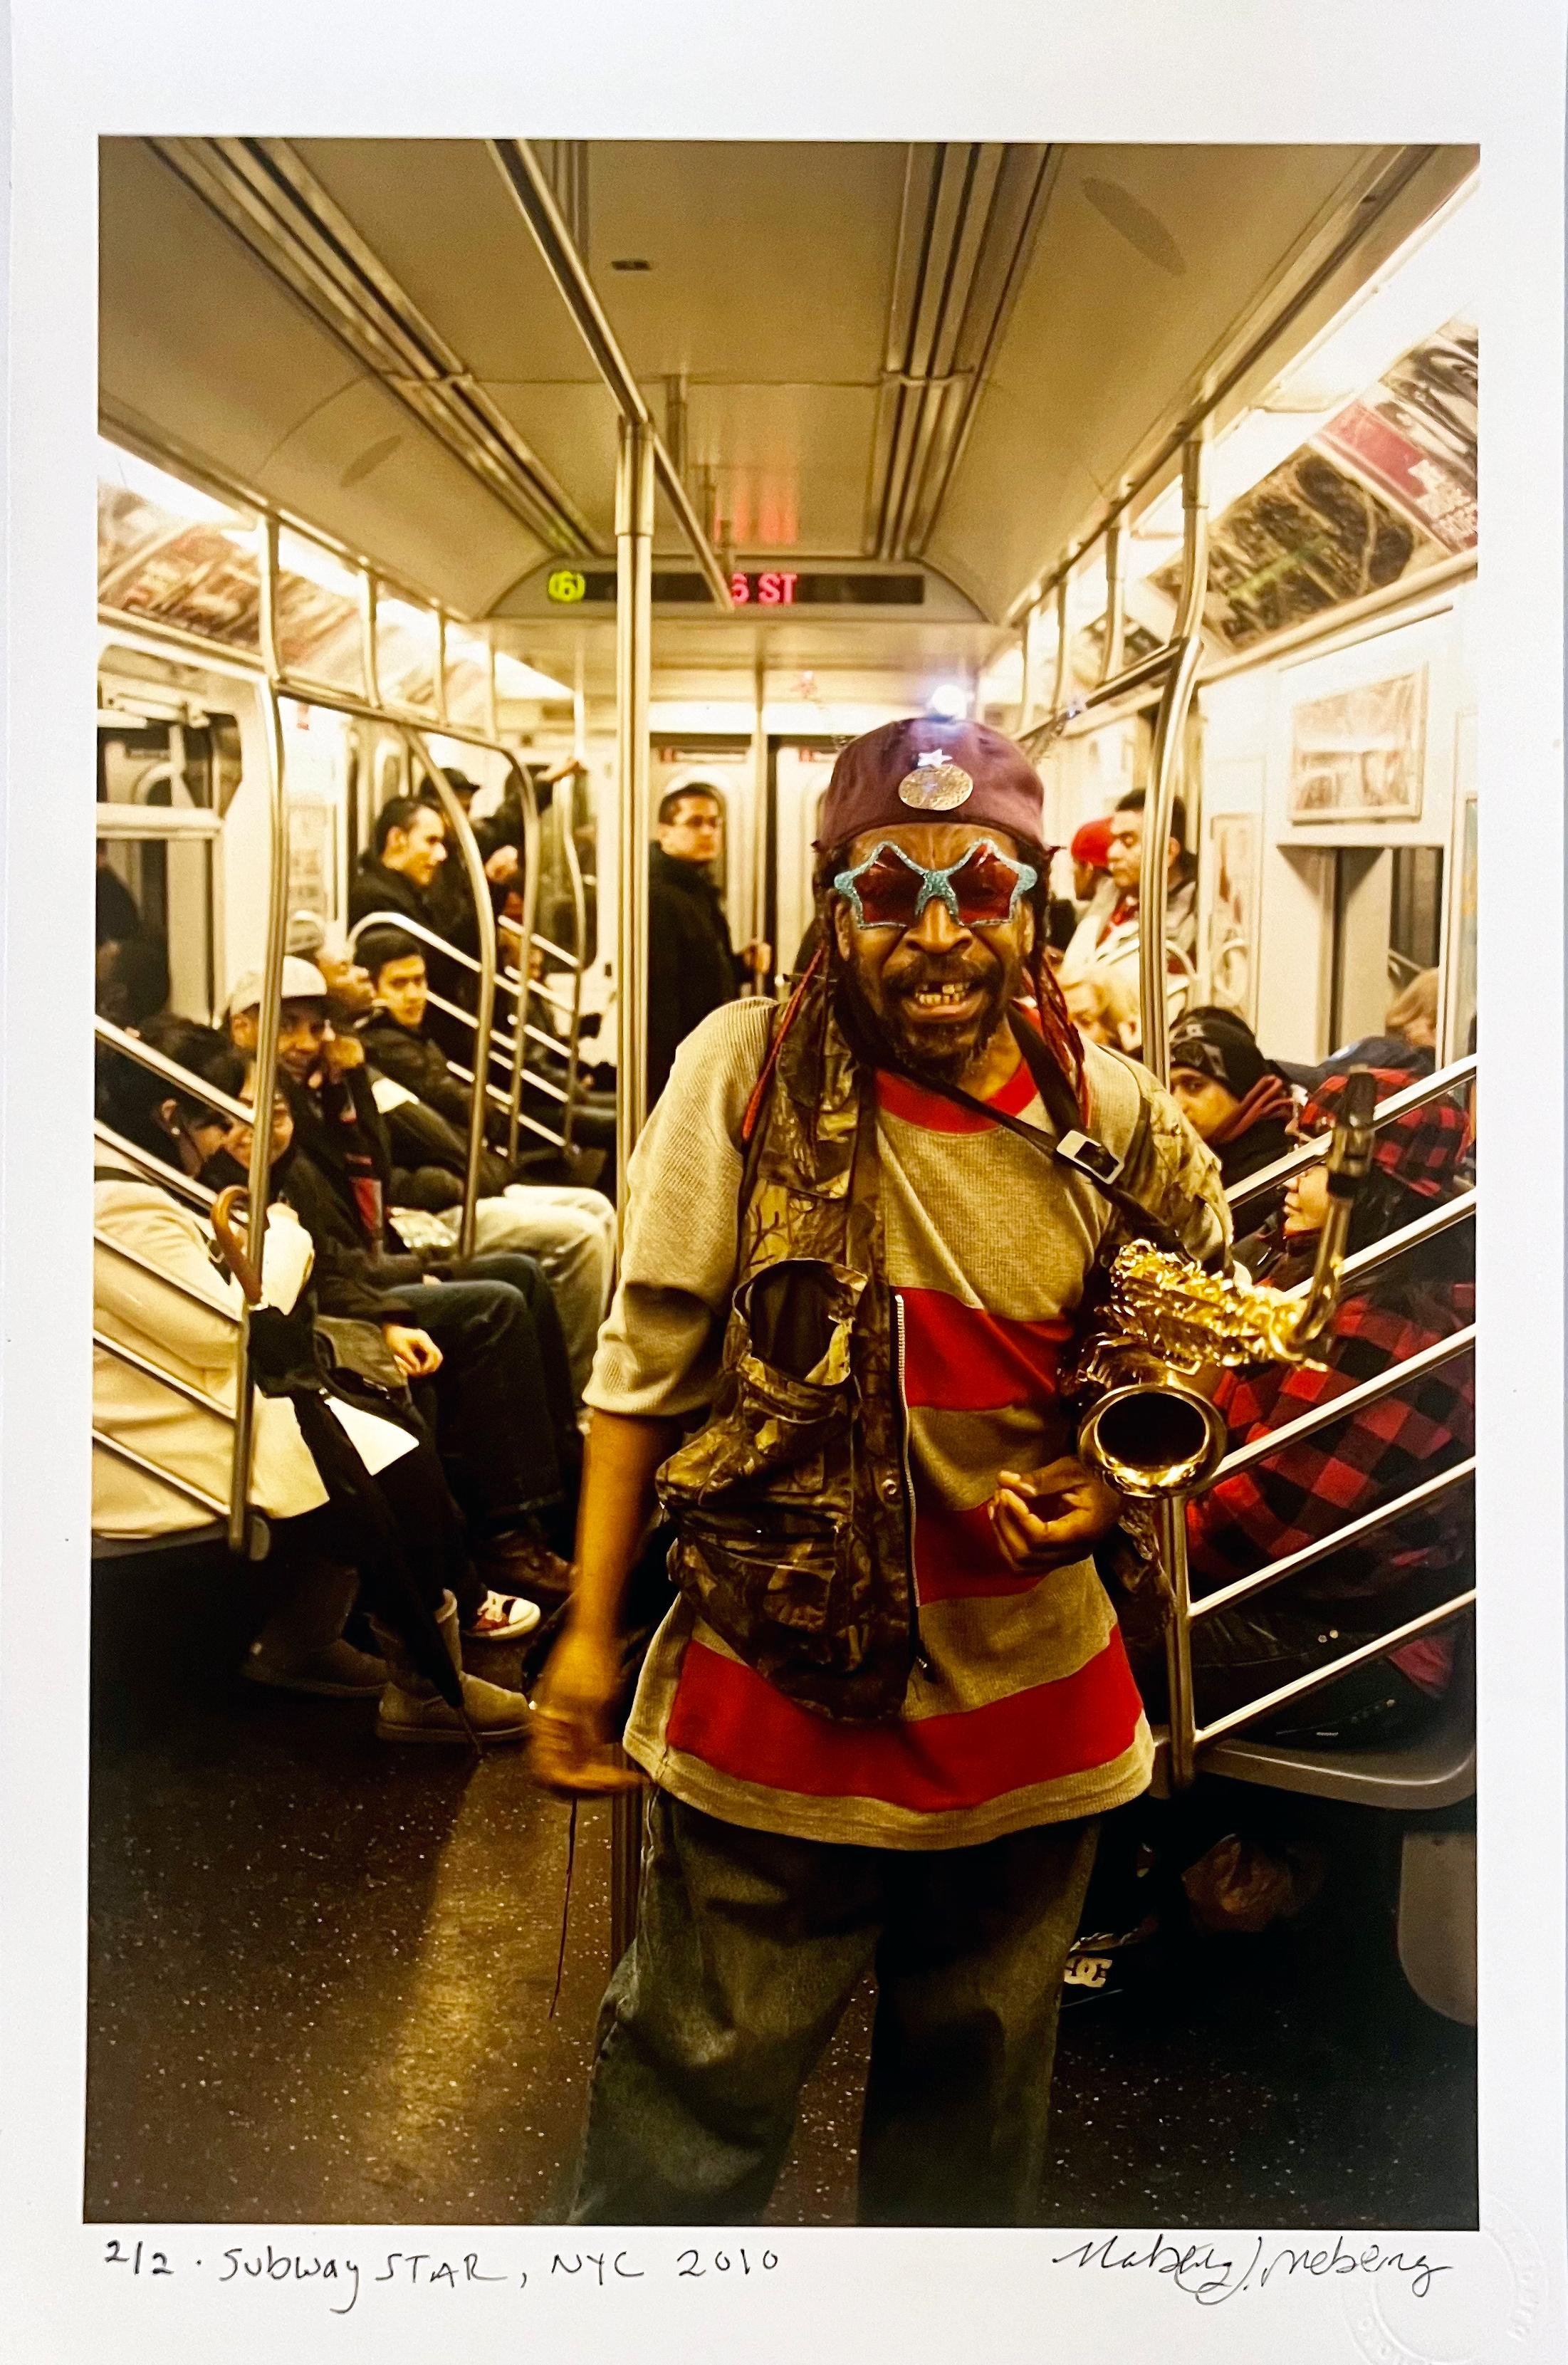 Subway Star, Street Photography New York City, Limited Edition Photograph